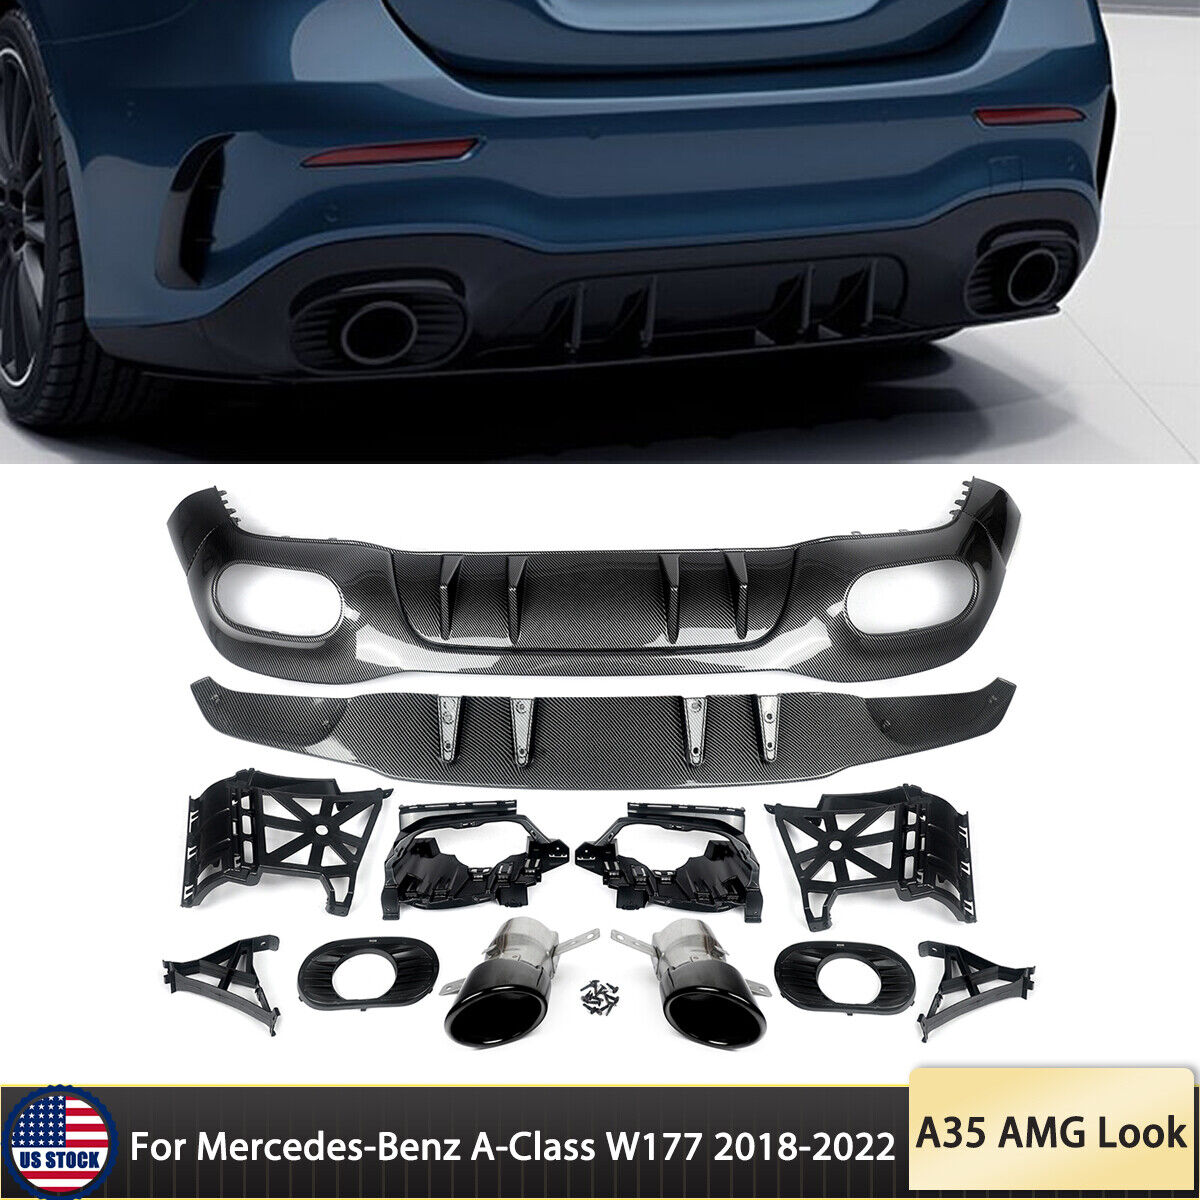 For Benz W177 A200 A250 Sport Rear Diffuser Lip W/Exhaust Tips A35 AMG Look